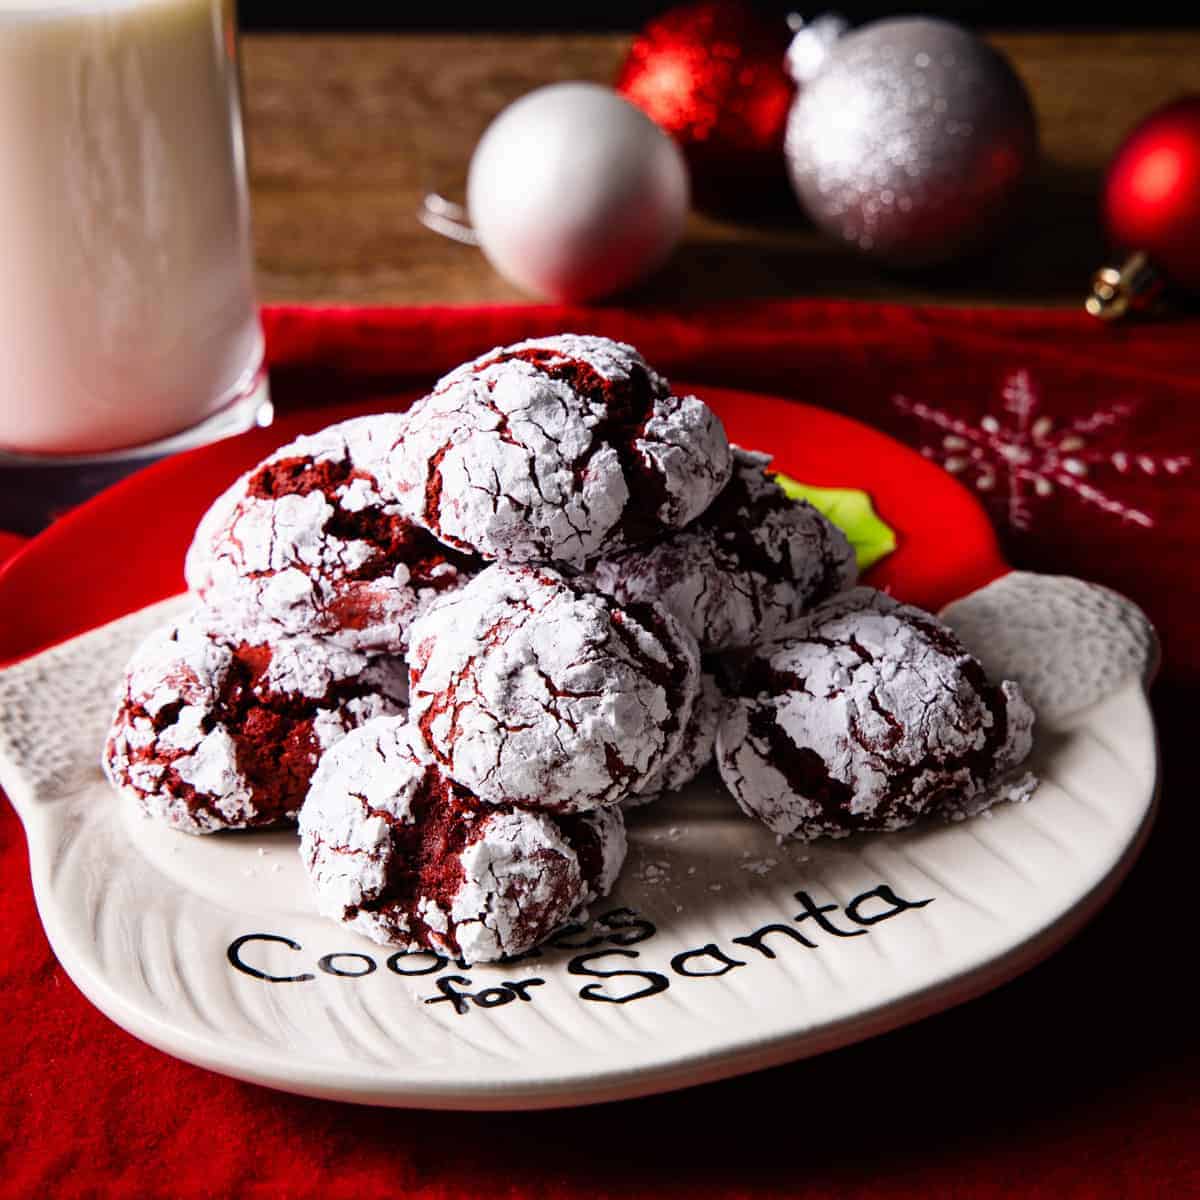 Plate of red velvet crinkle cookies shown on a table with a red placemat and surrounded by Christmas ornaments. 